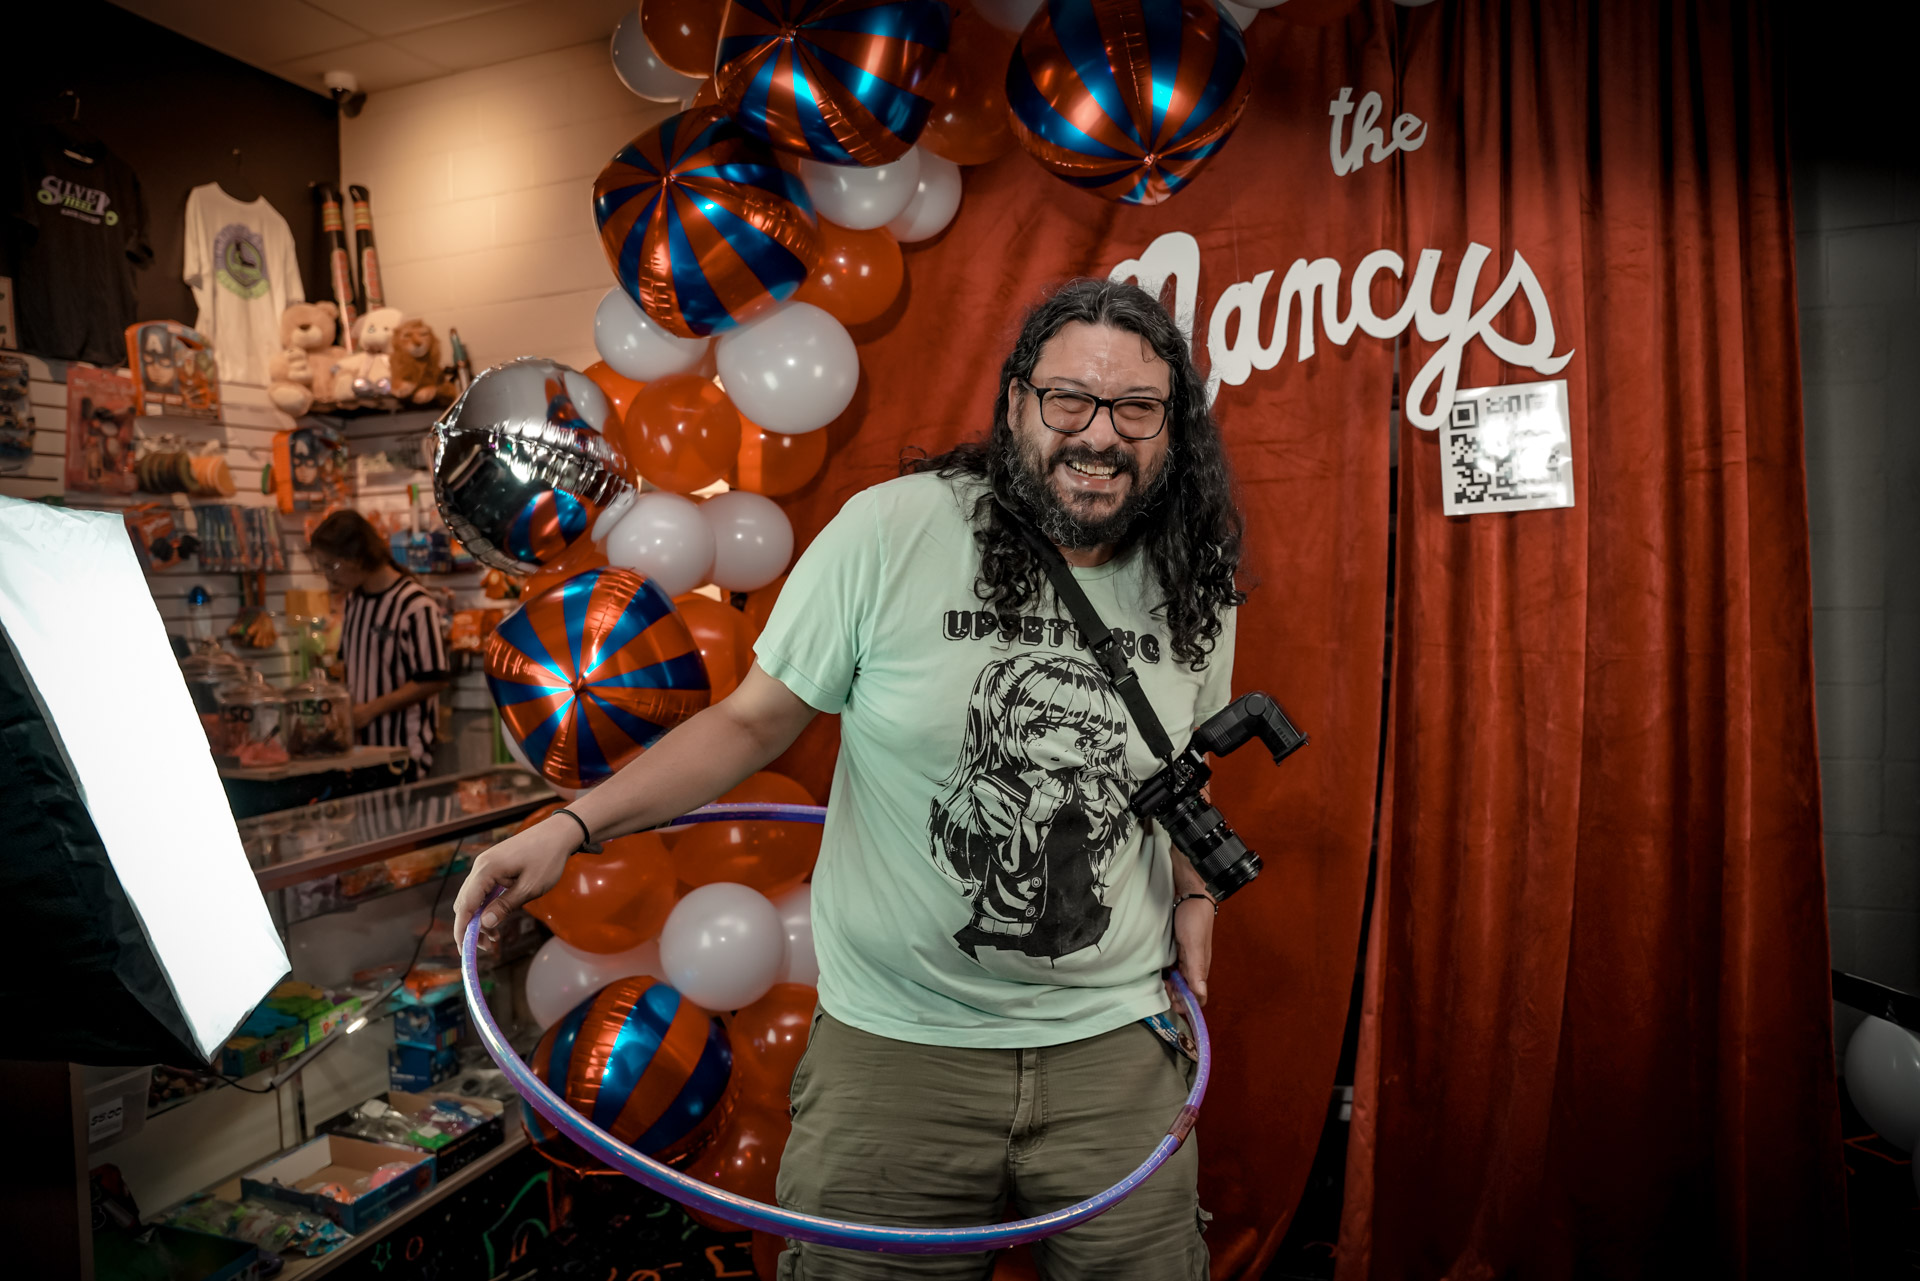 A guy in front of a backdrop with balloons, hula-hooping